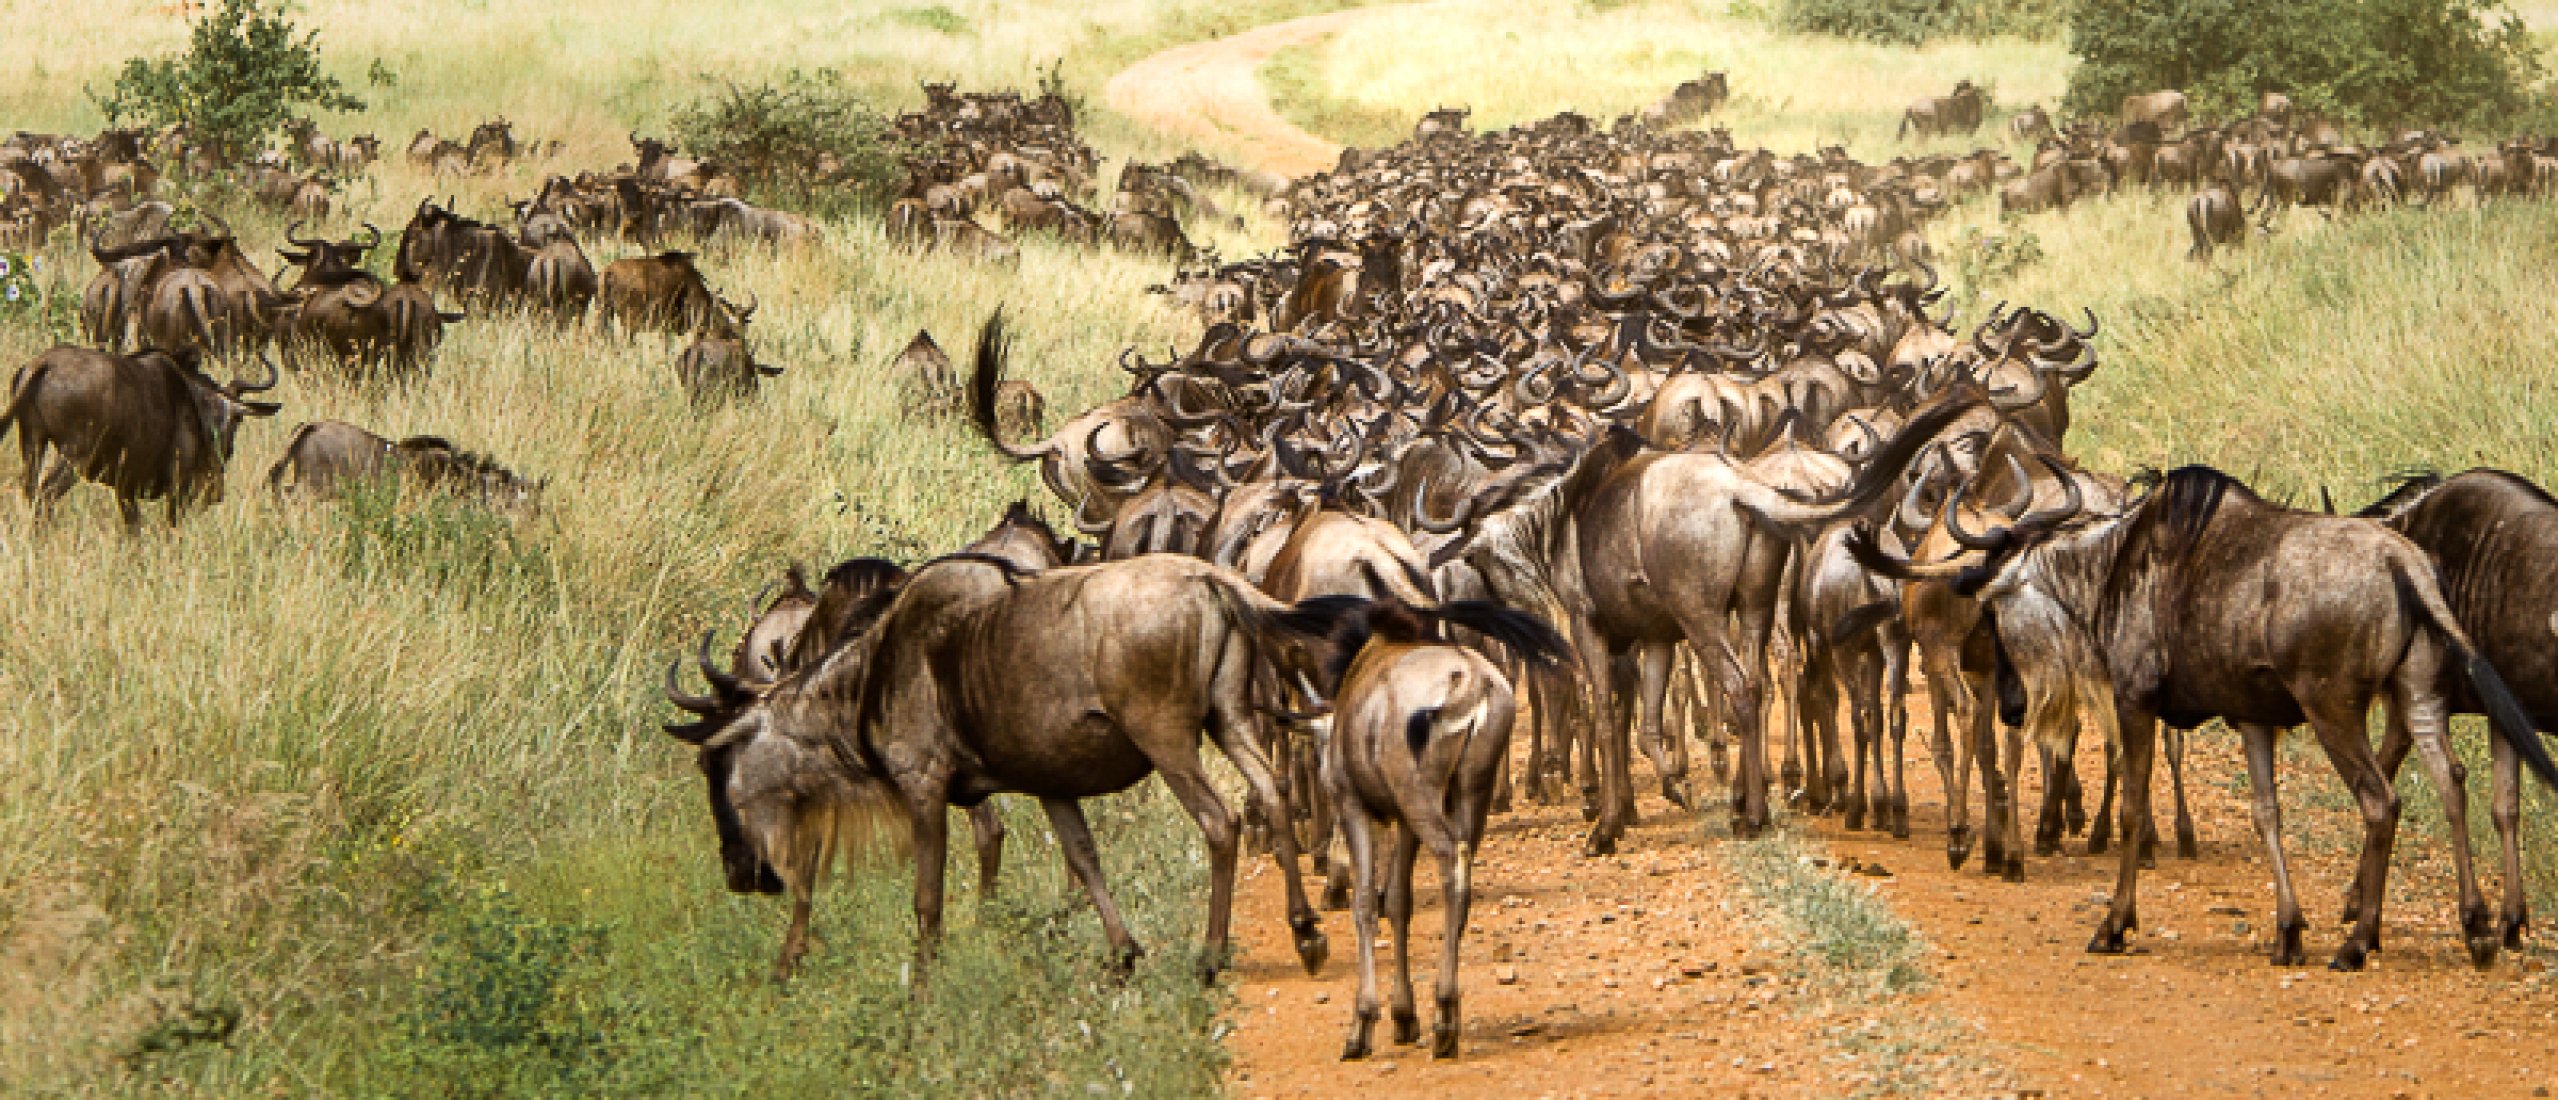 The Great Migration in the Serengeti-Mara Ecosystem